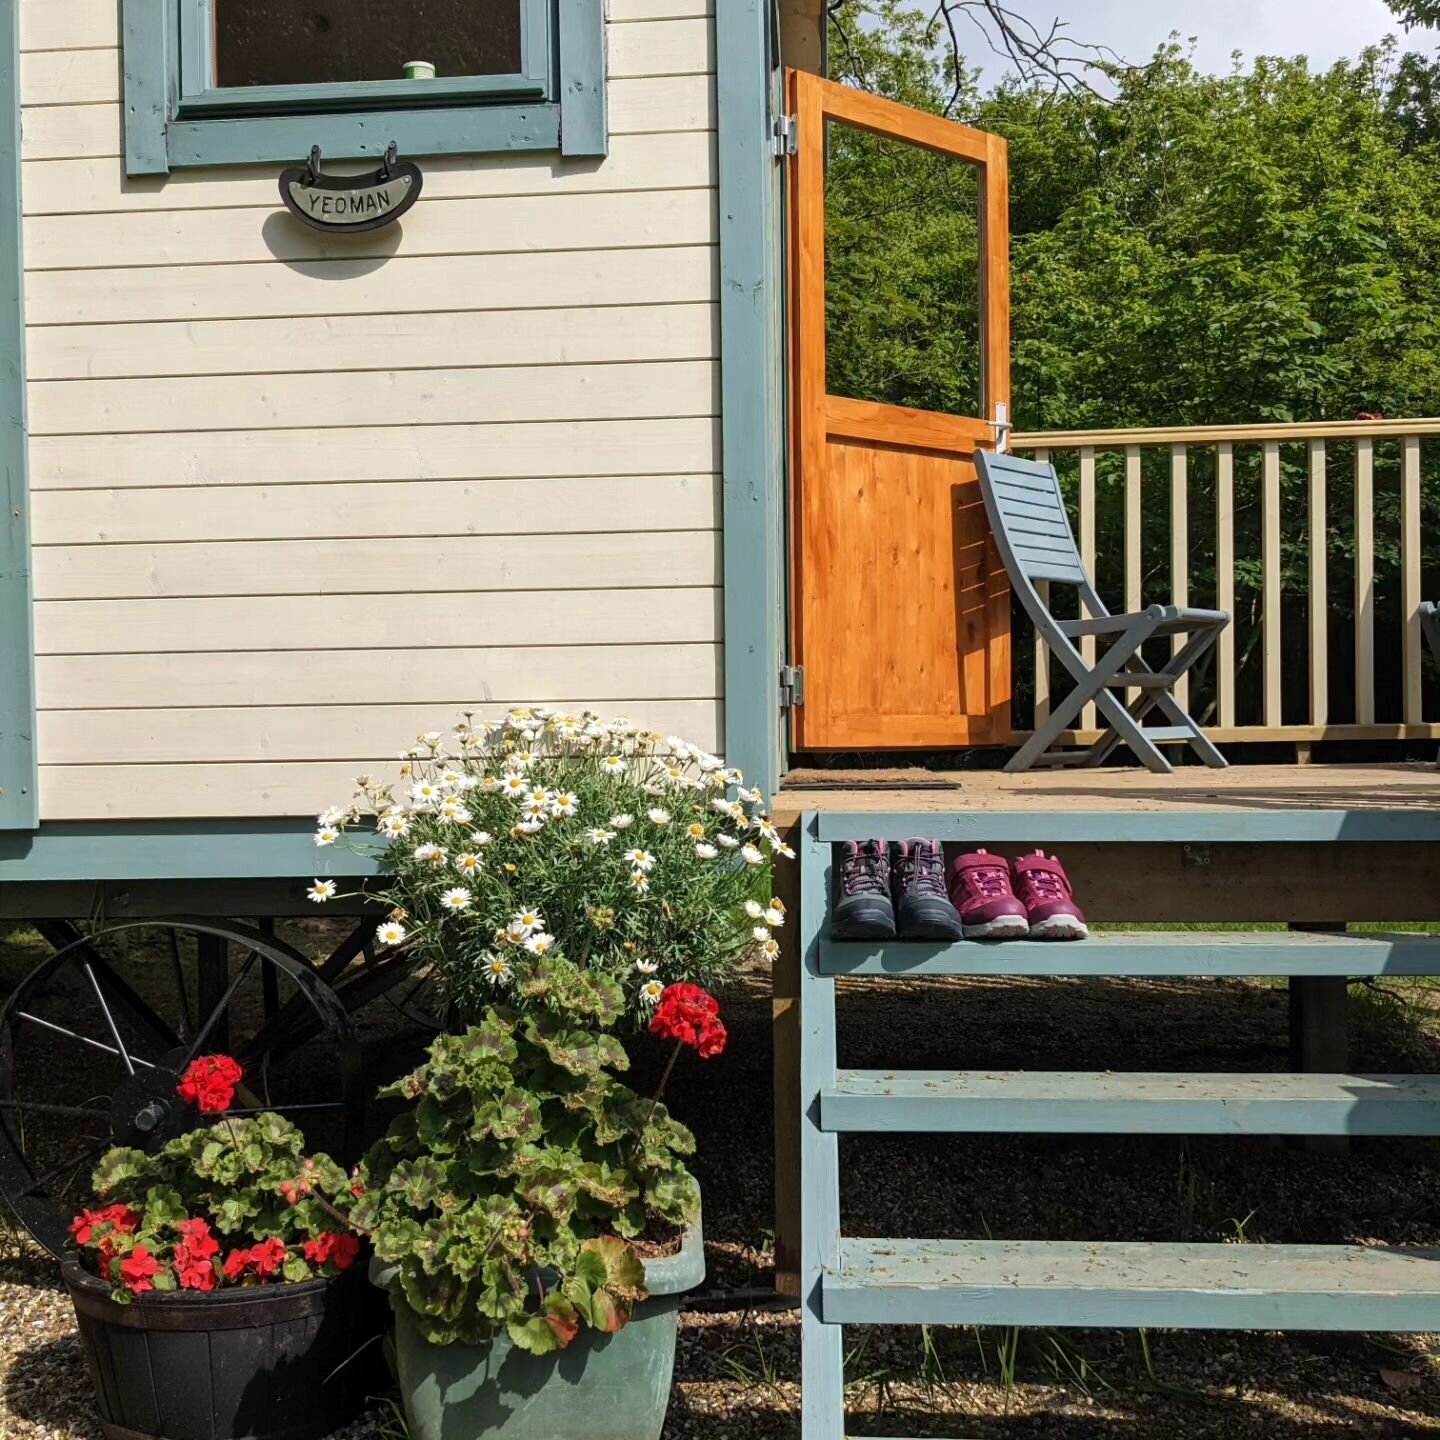 June Prize Draw🌳

Ad/ Gifted Prize

To celebrate summer's arrival, say howdy to @stay_at_forest_edge and a chance to win a 2-night stay in Yeoman Shepherd Hut.

This is the ideal location for individuals, couples, and families seeking a getaway. Sit